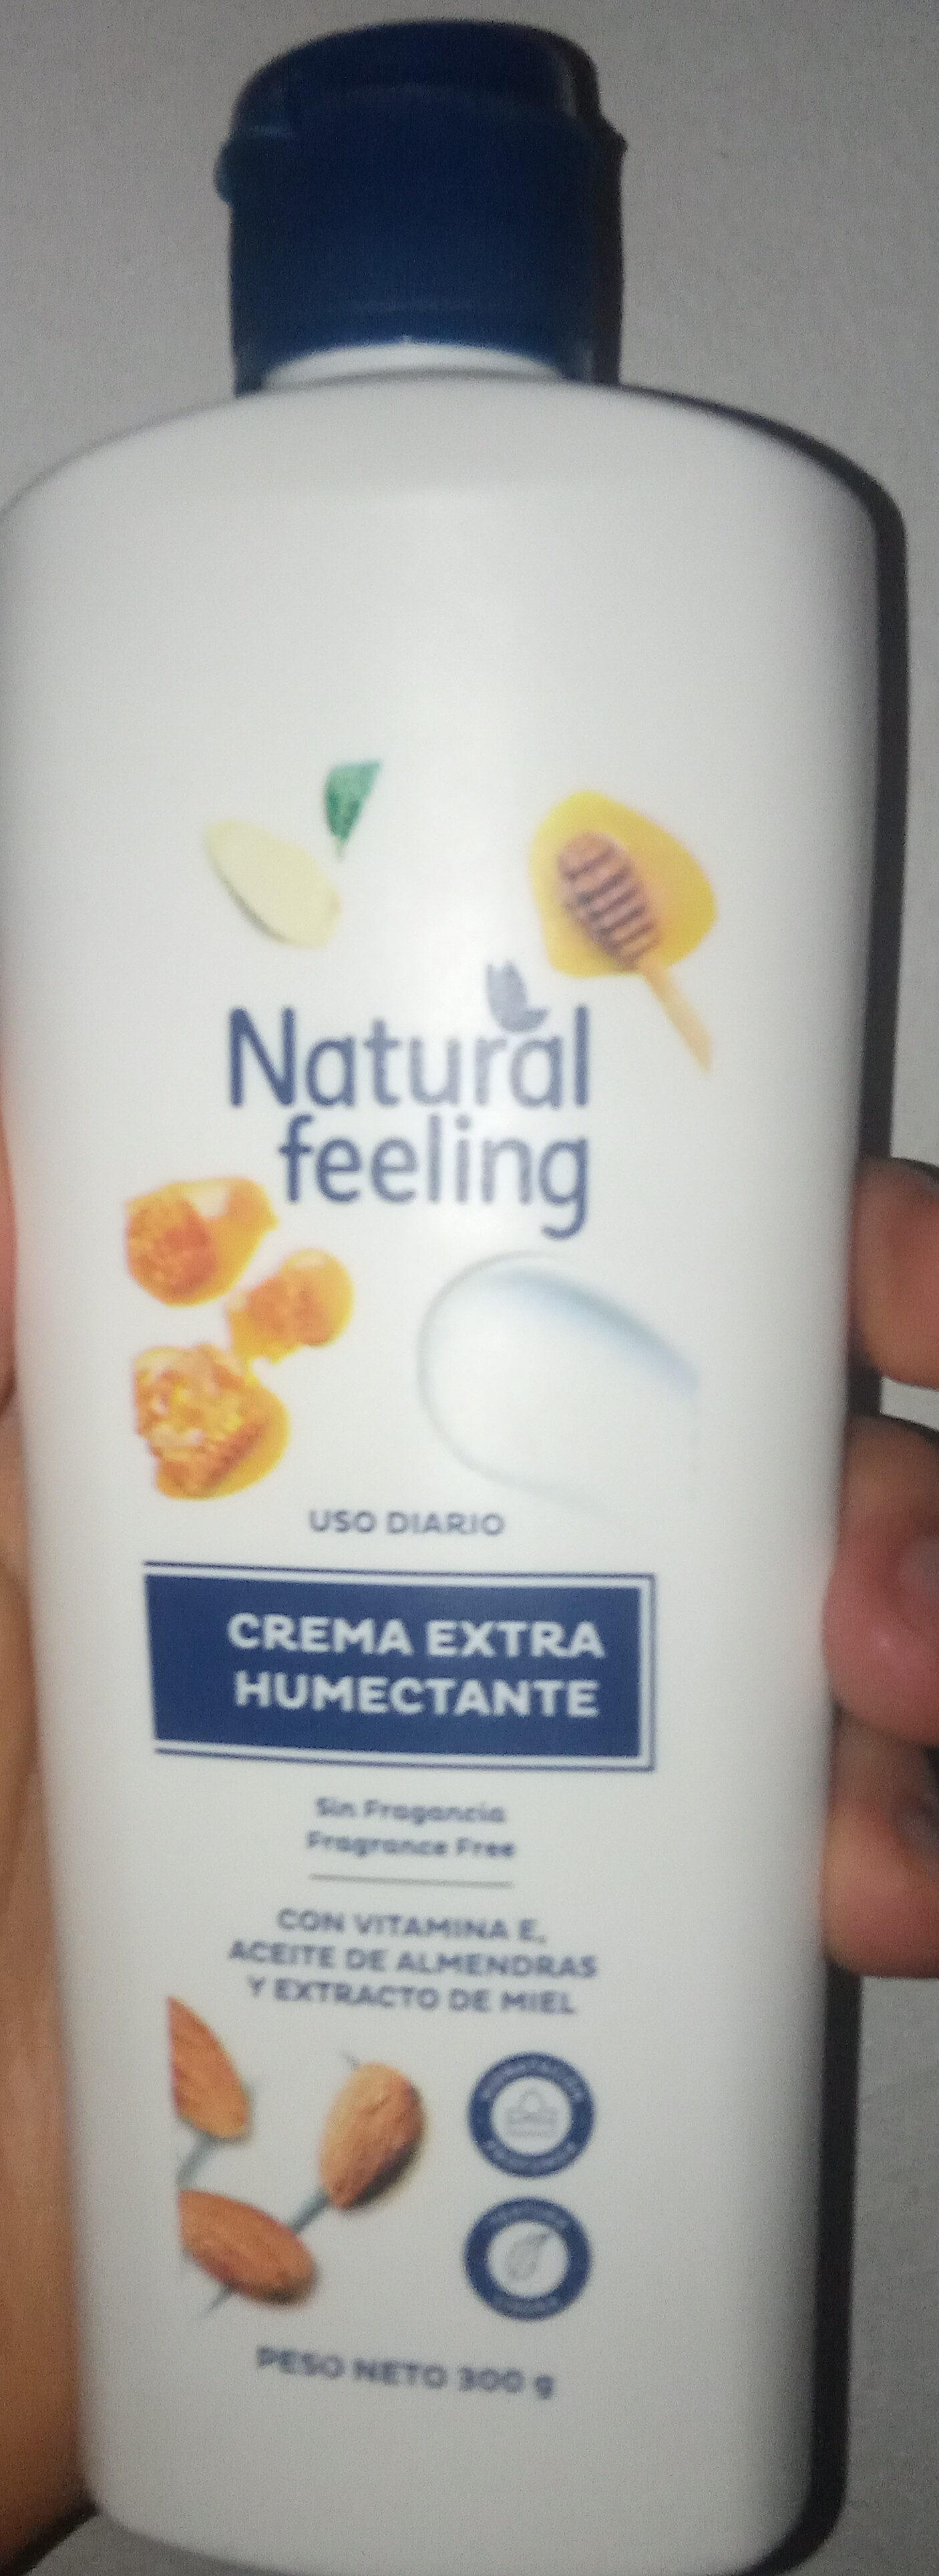 Natural Feeling | Crema Extra Humectante - Product - es